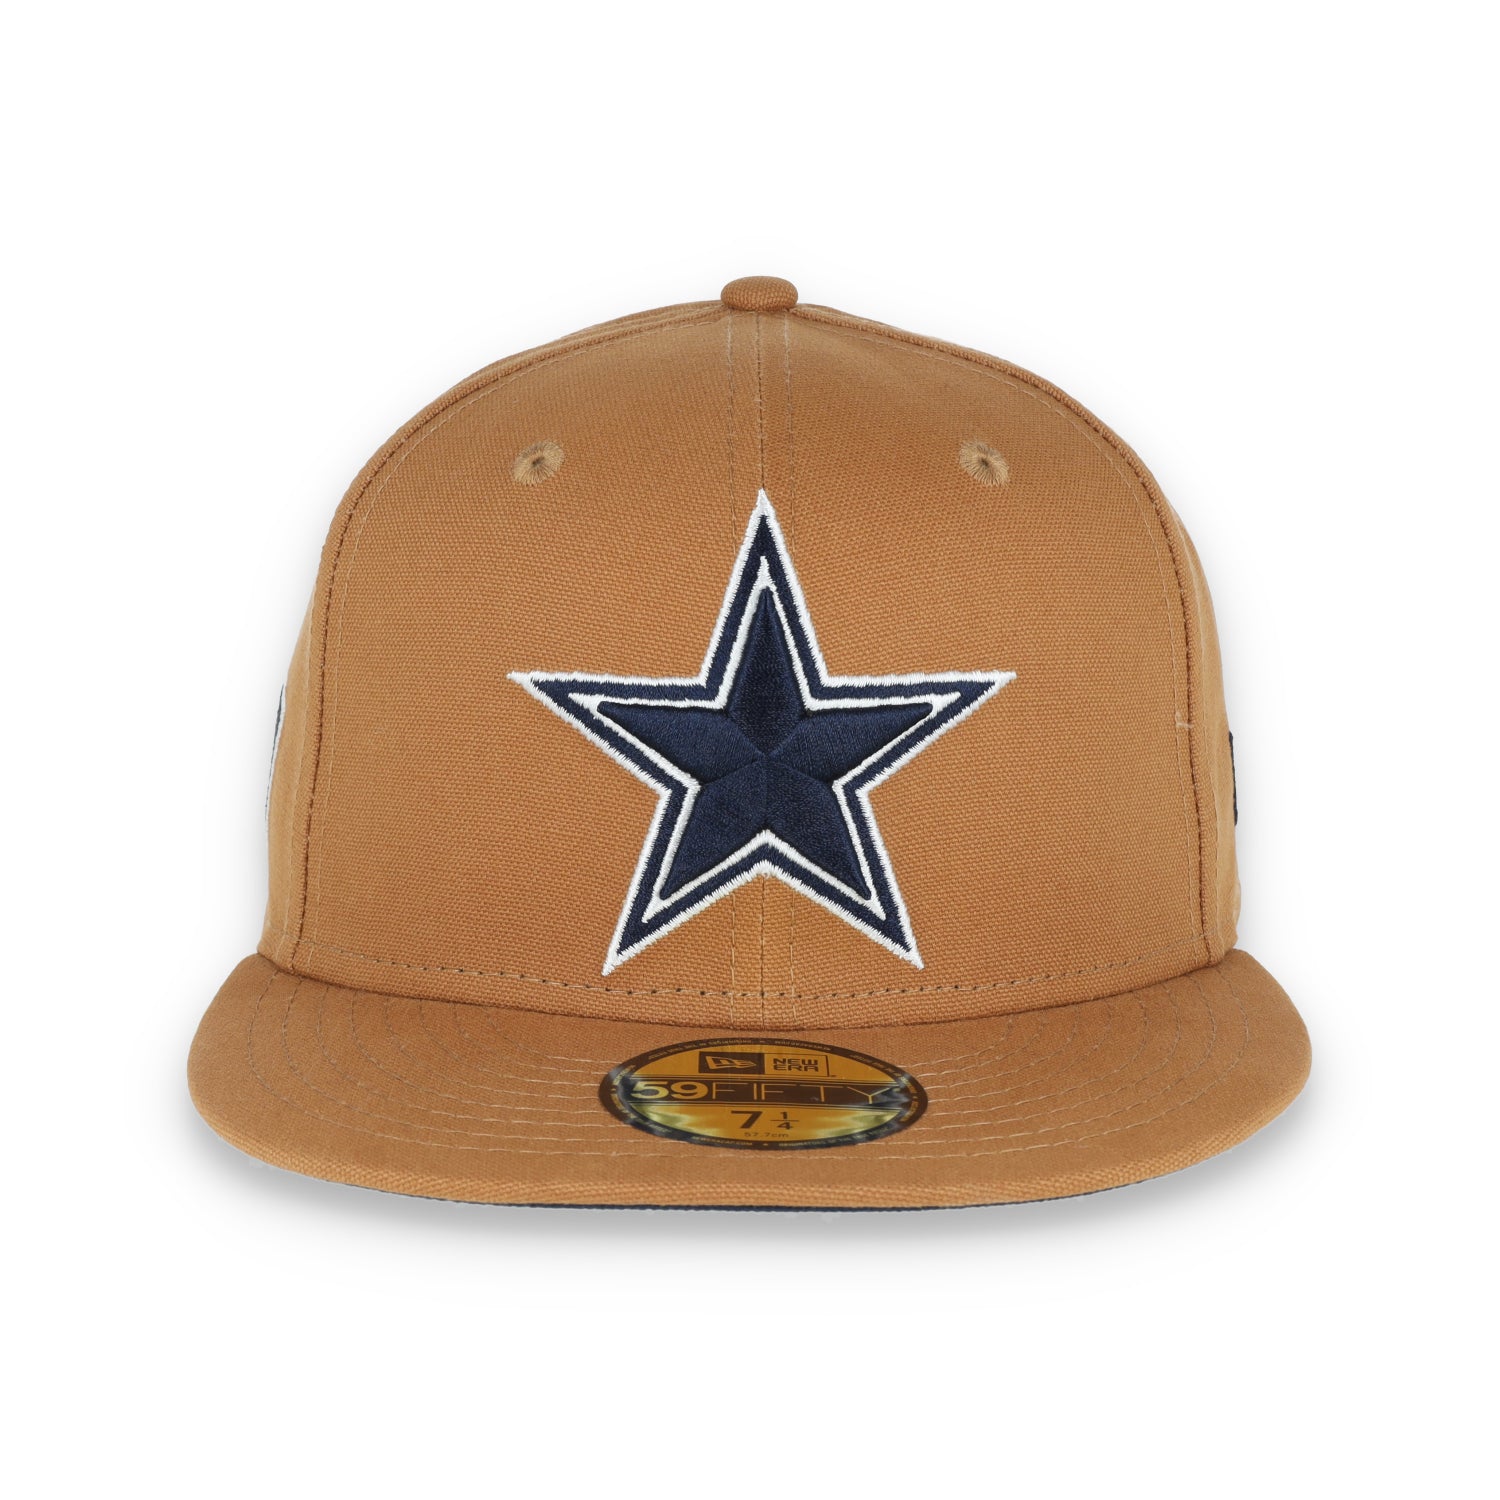 New Era Dallas Cowboys 59FIFTY Fitted Hat- Bronze/Navy